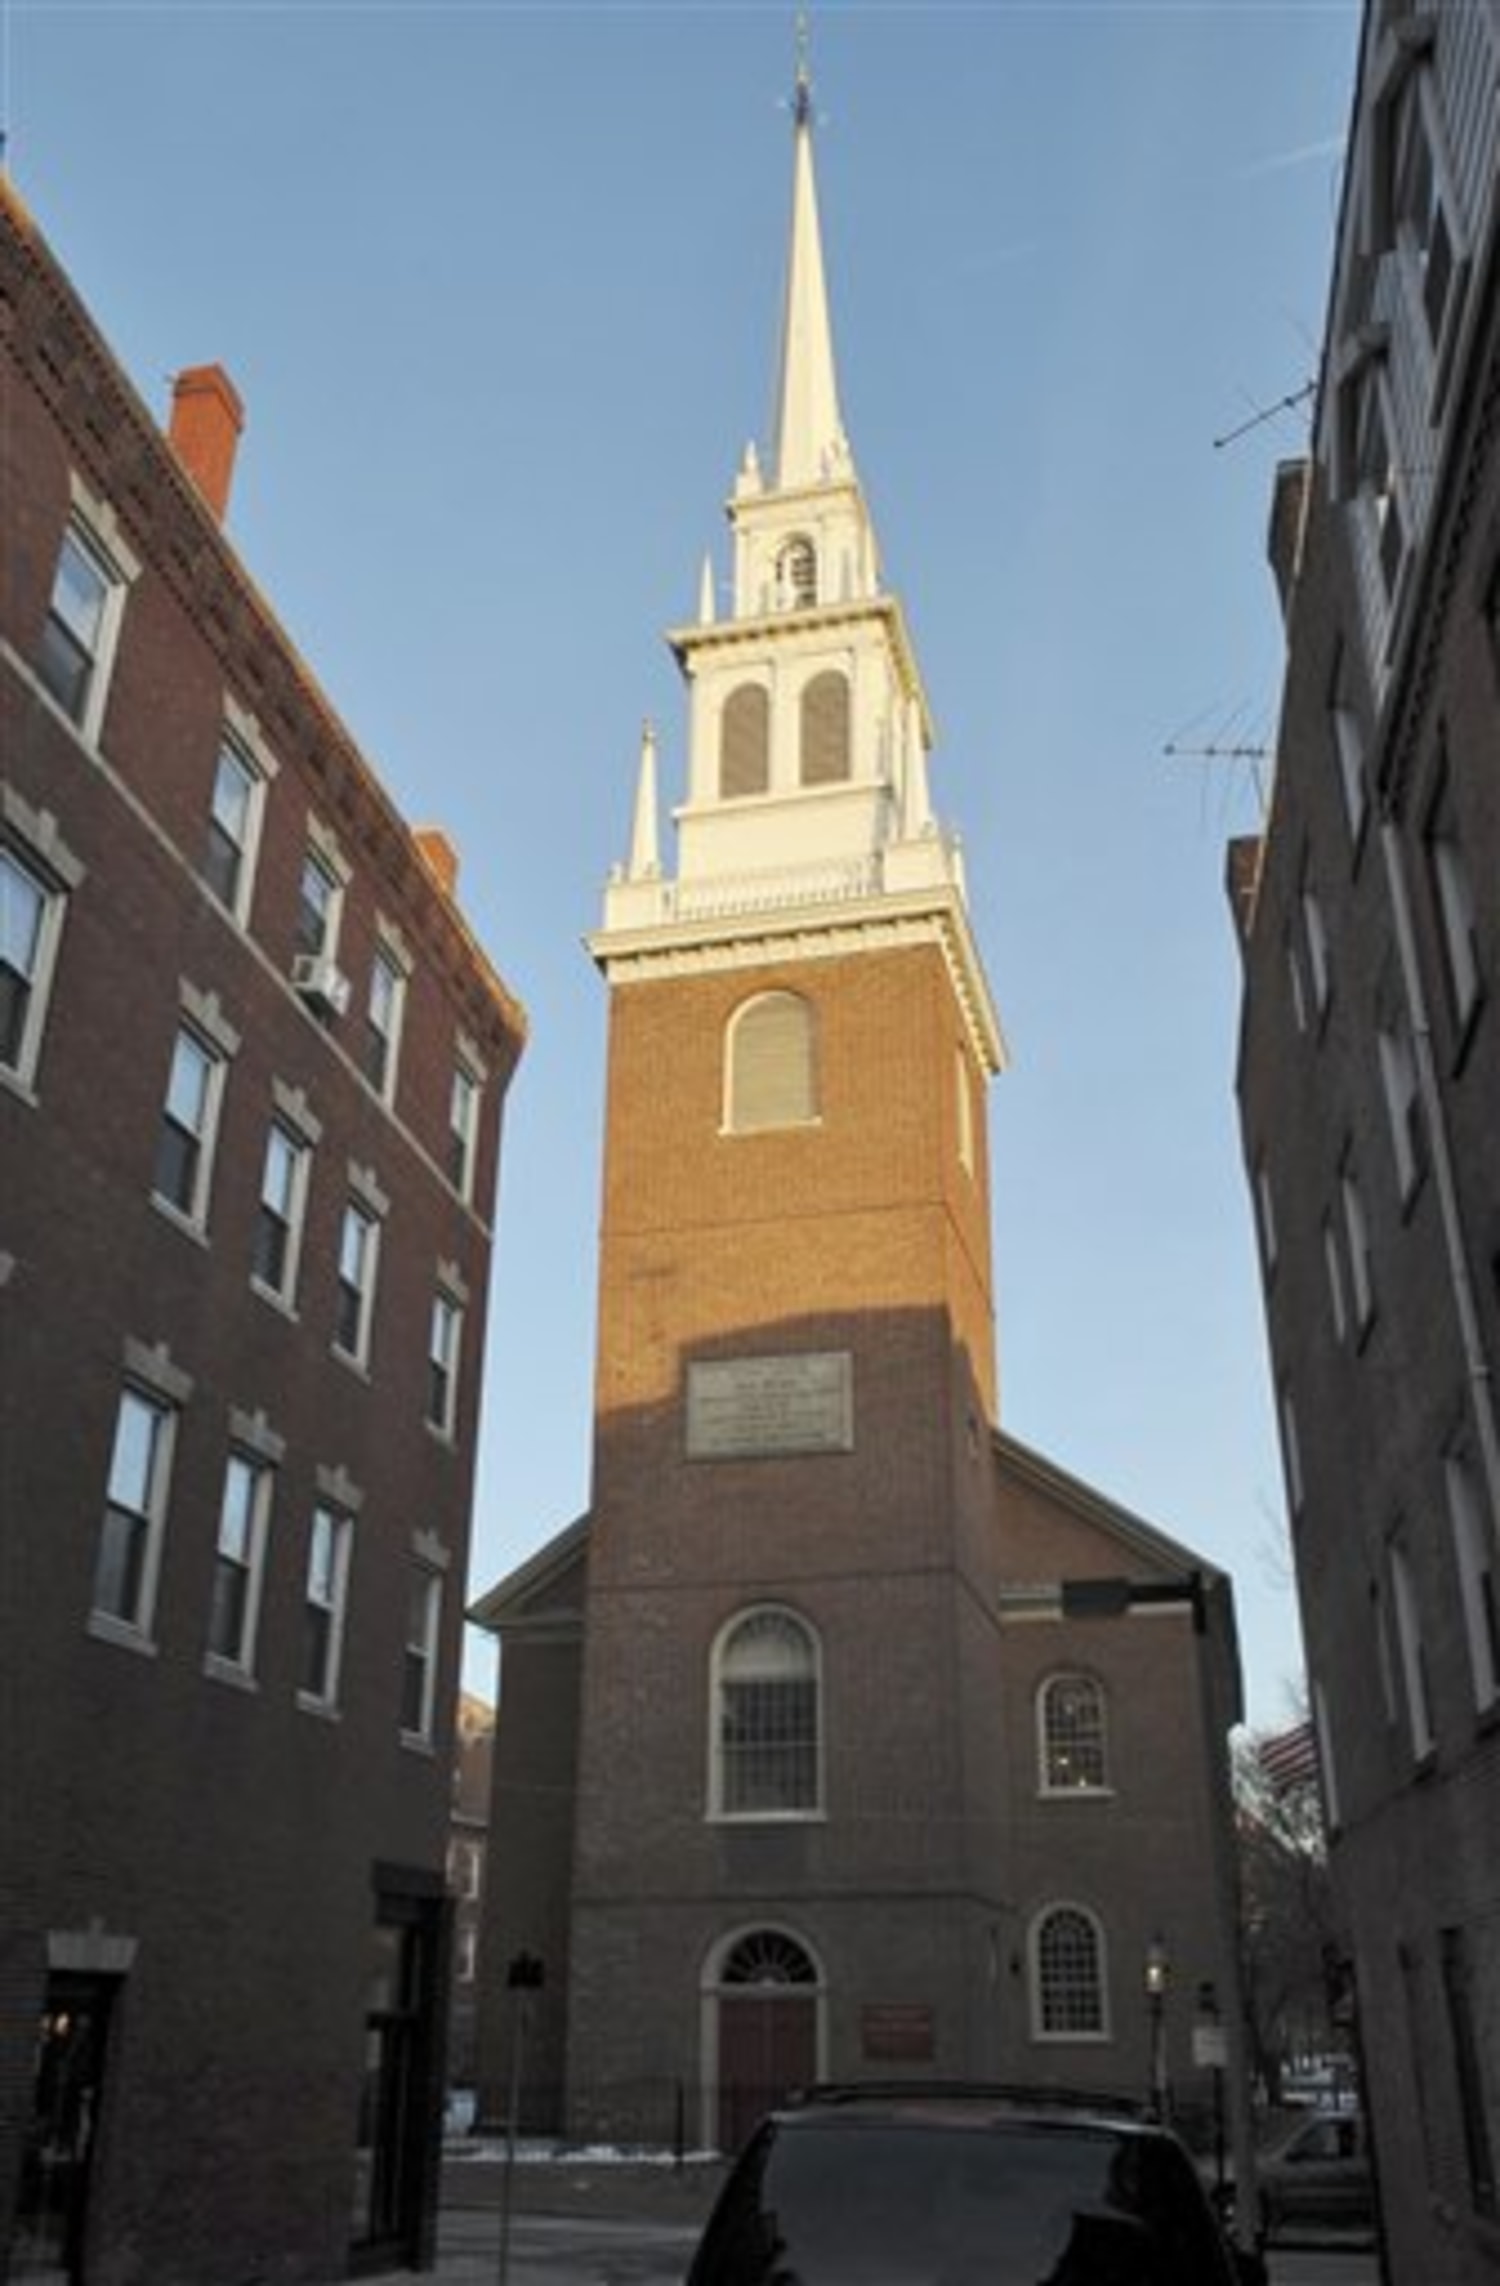 Story of the Steeples in Boston, MA